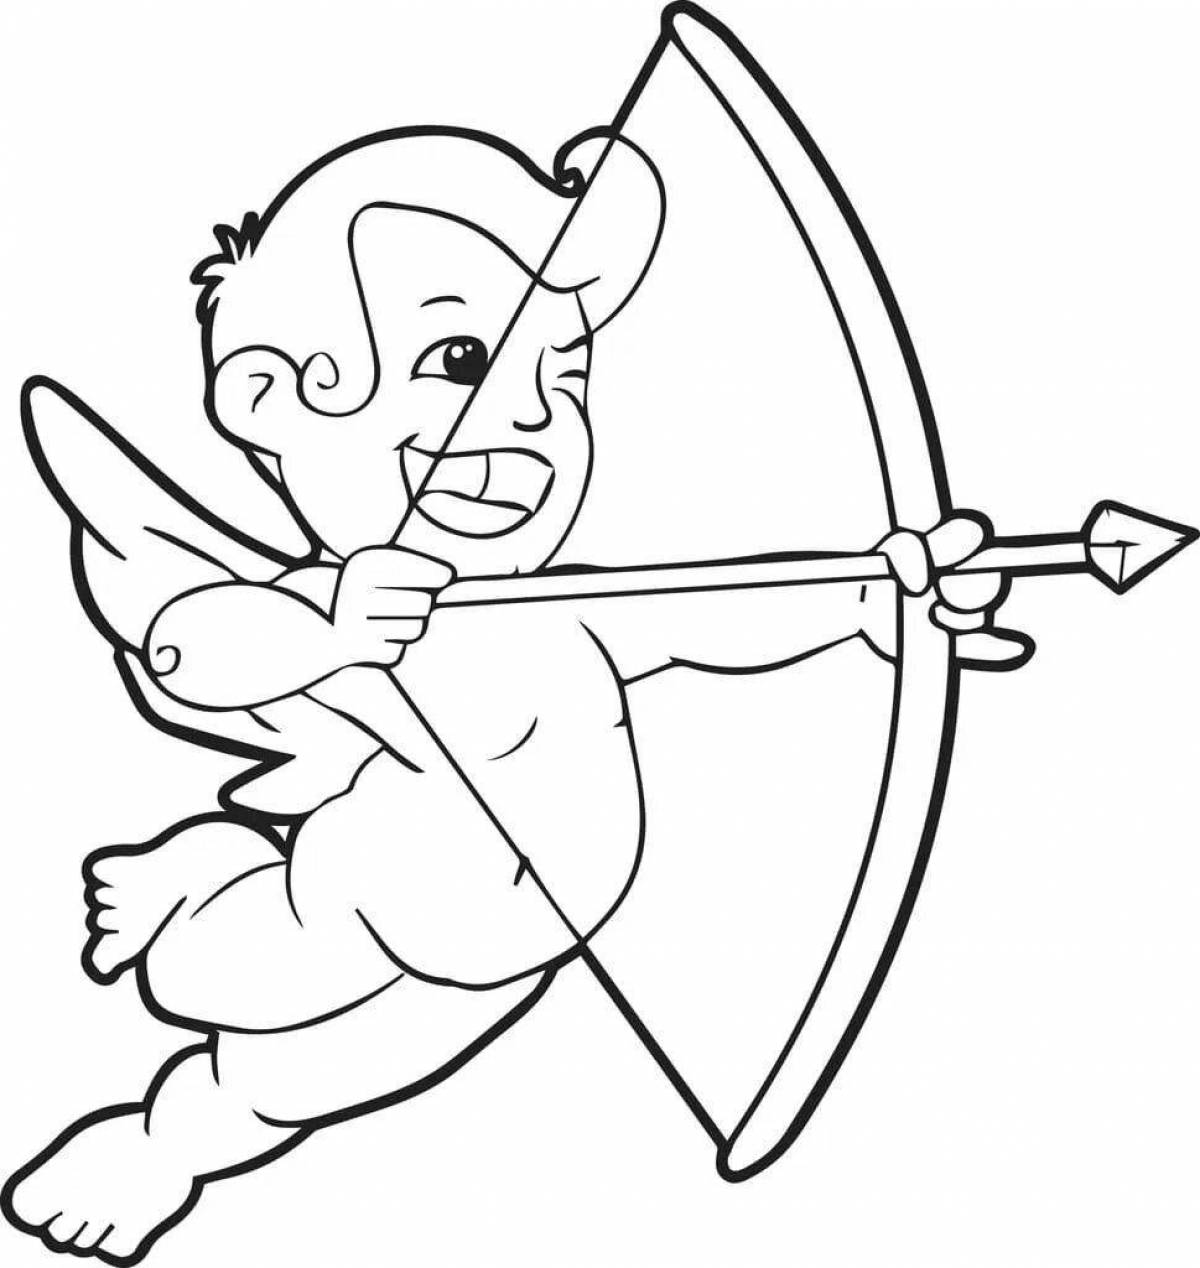 Bright cupid coloring page